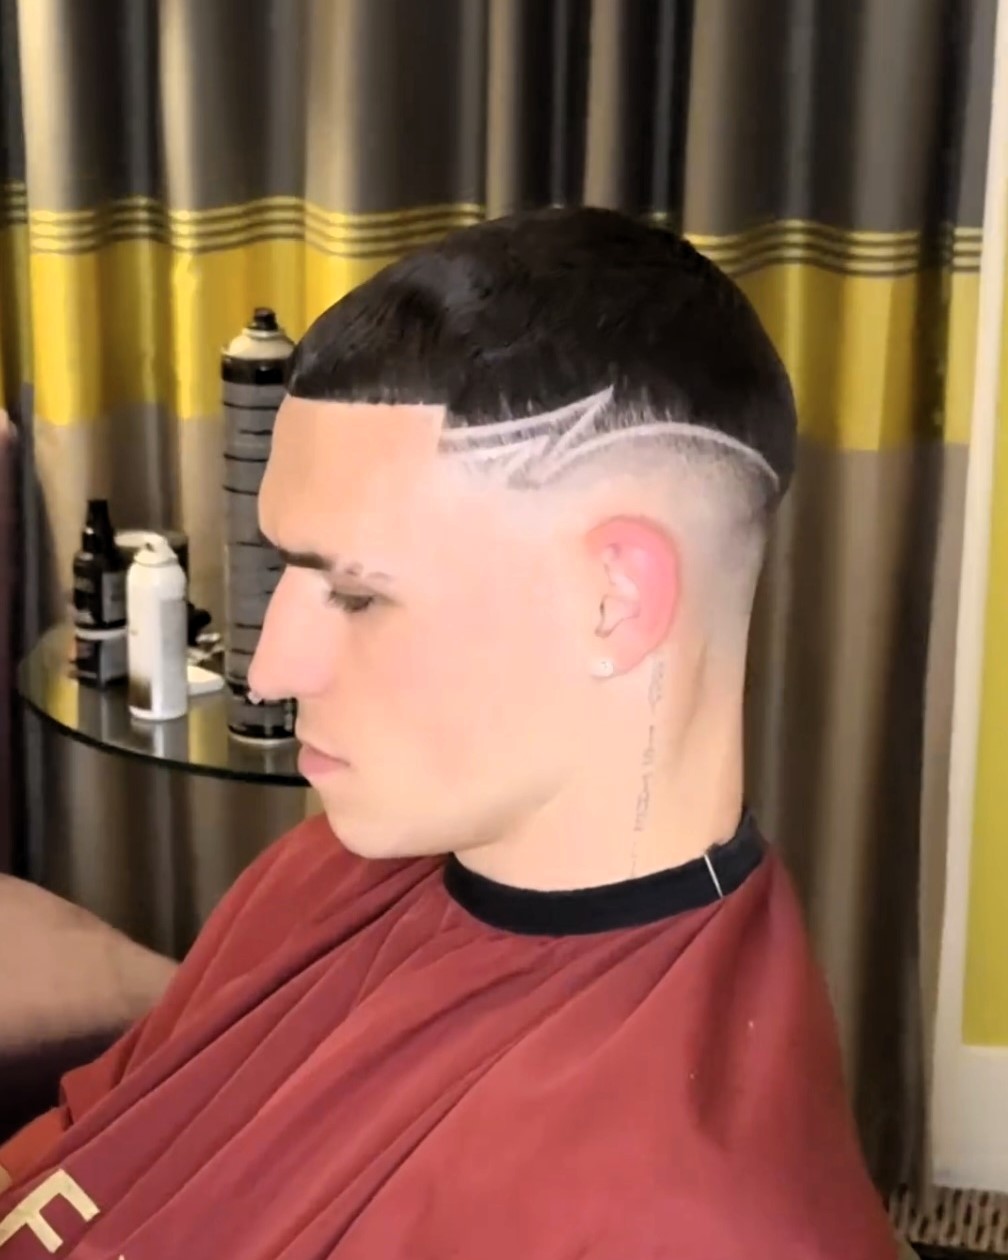 Phil Foden's new zig-zag tramline haircut draws mixed reactions, with fans mocking it as a kid's style while others praise the daring look.